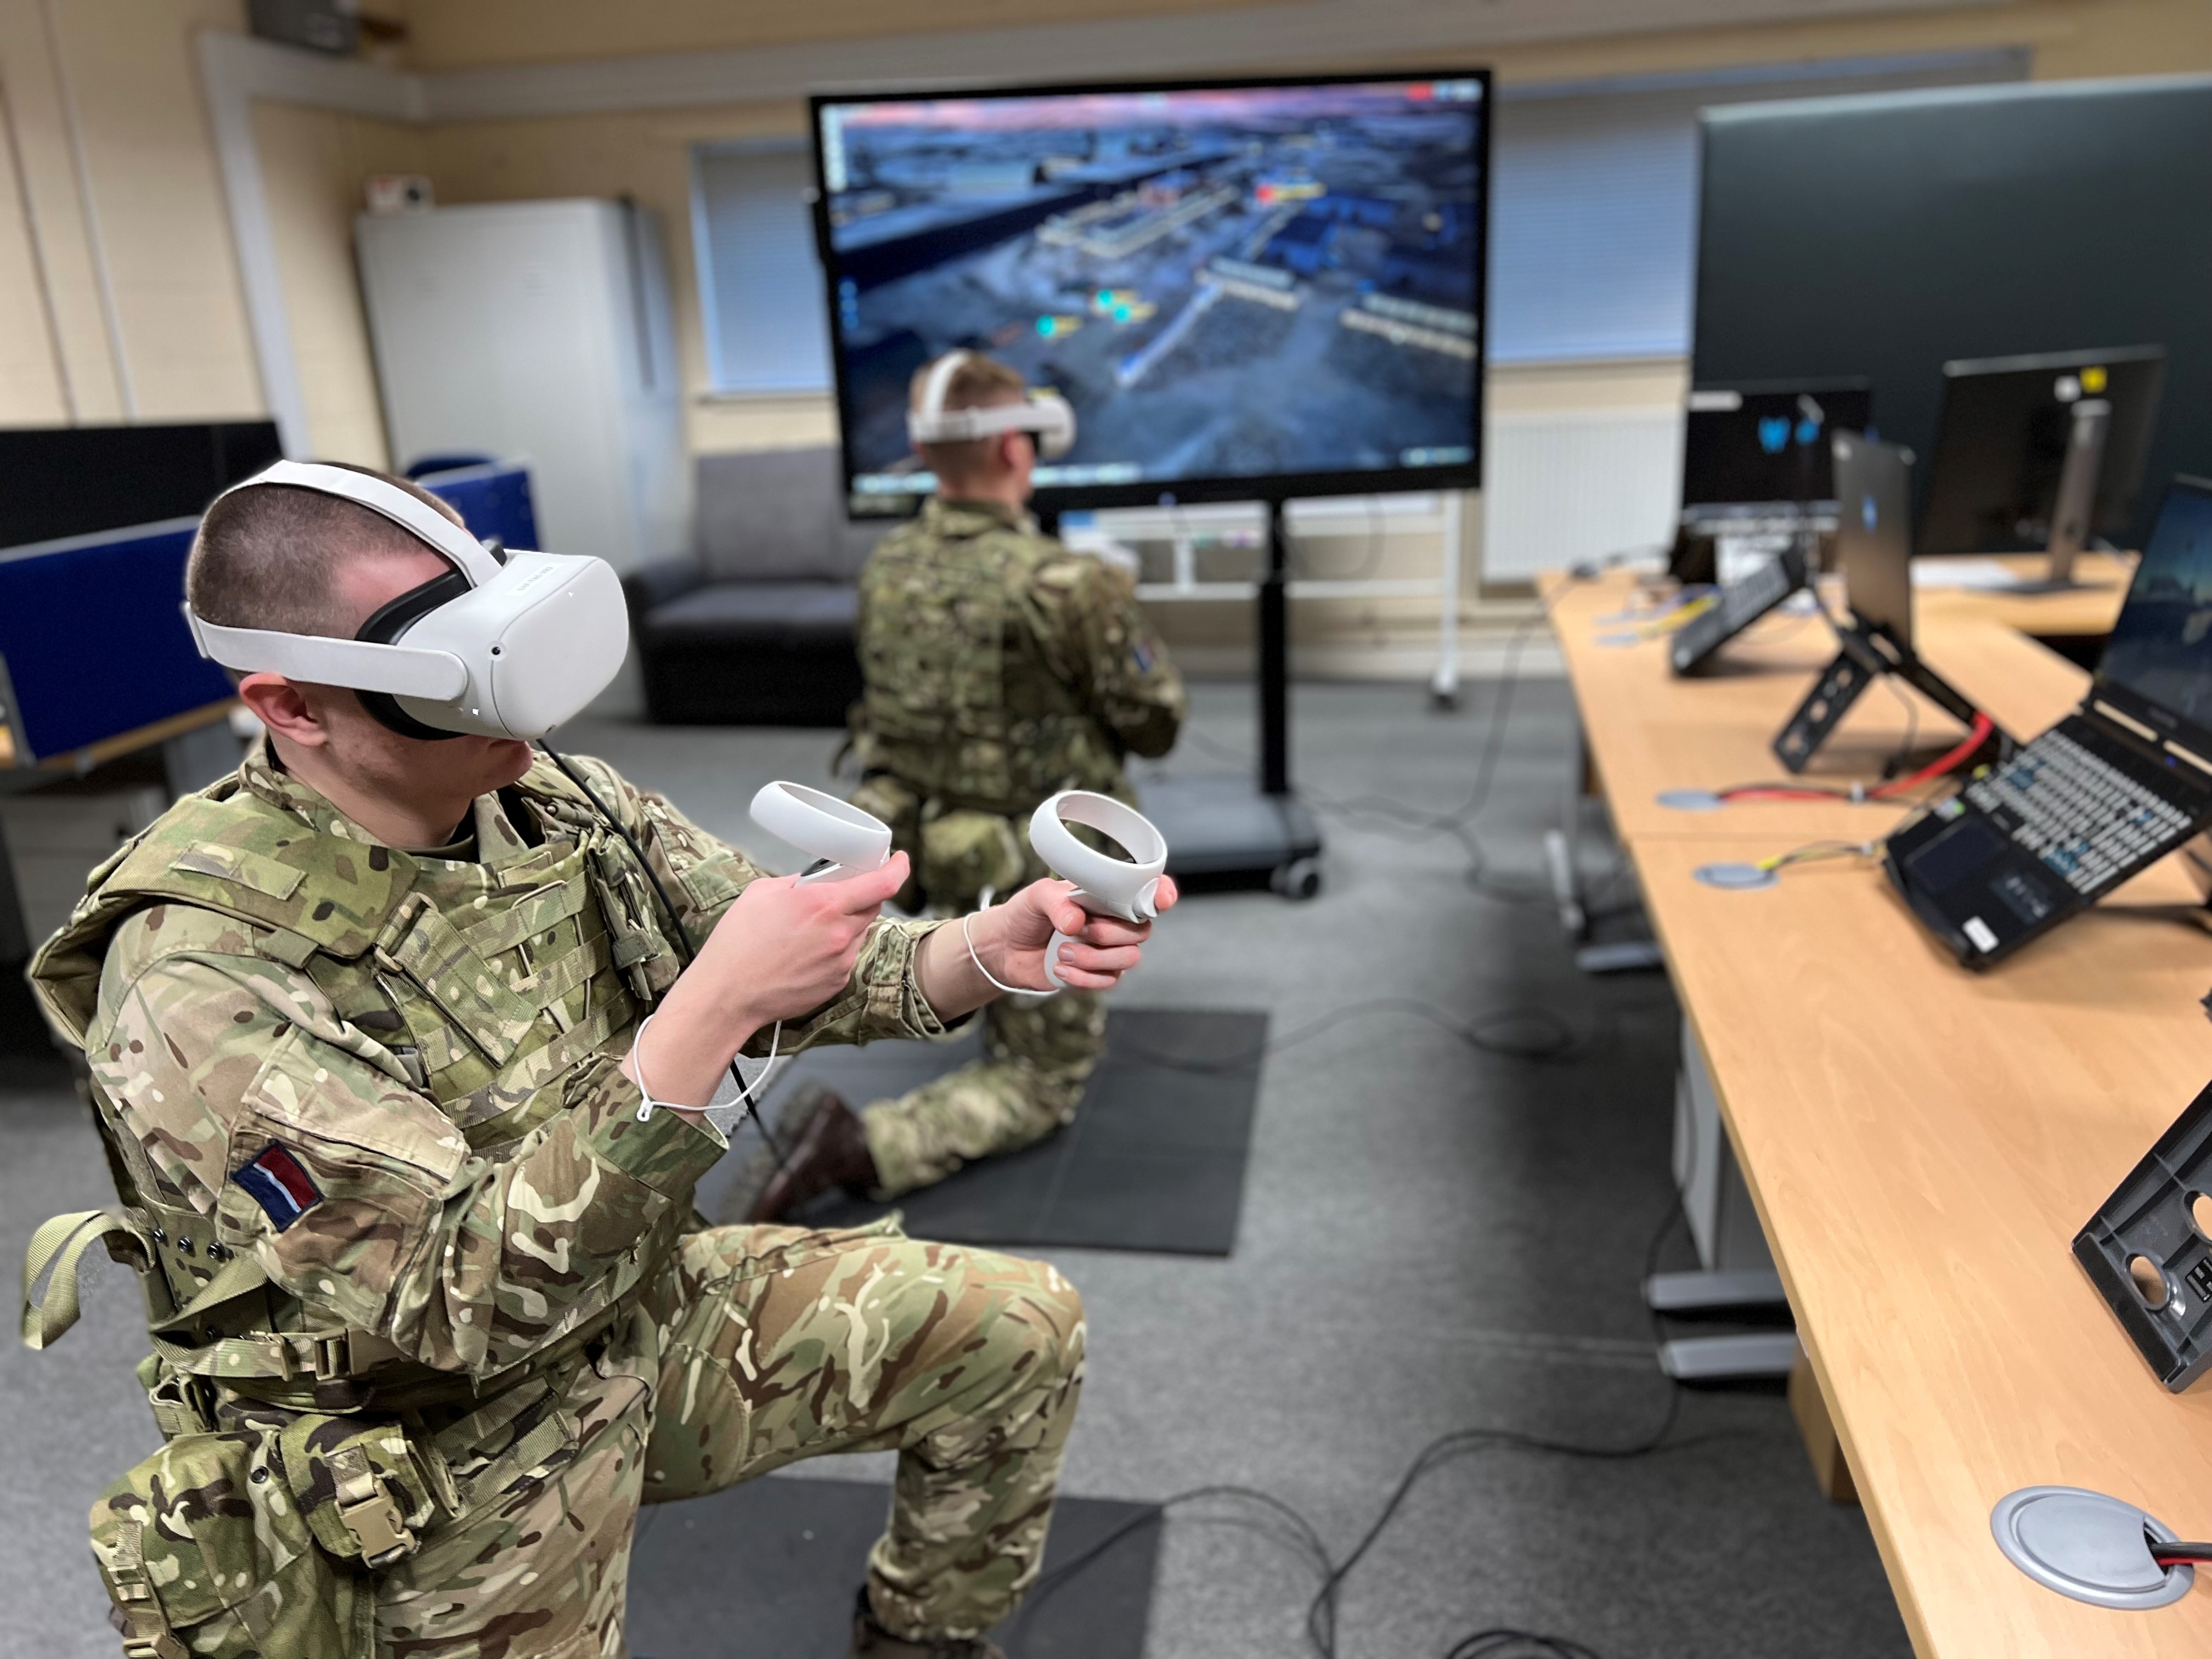 Personnel wear Virtual Reality headsets and use equipment.